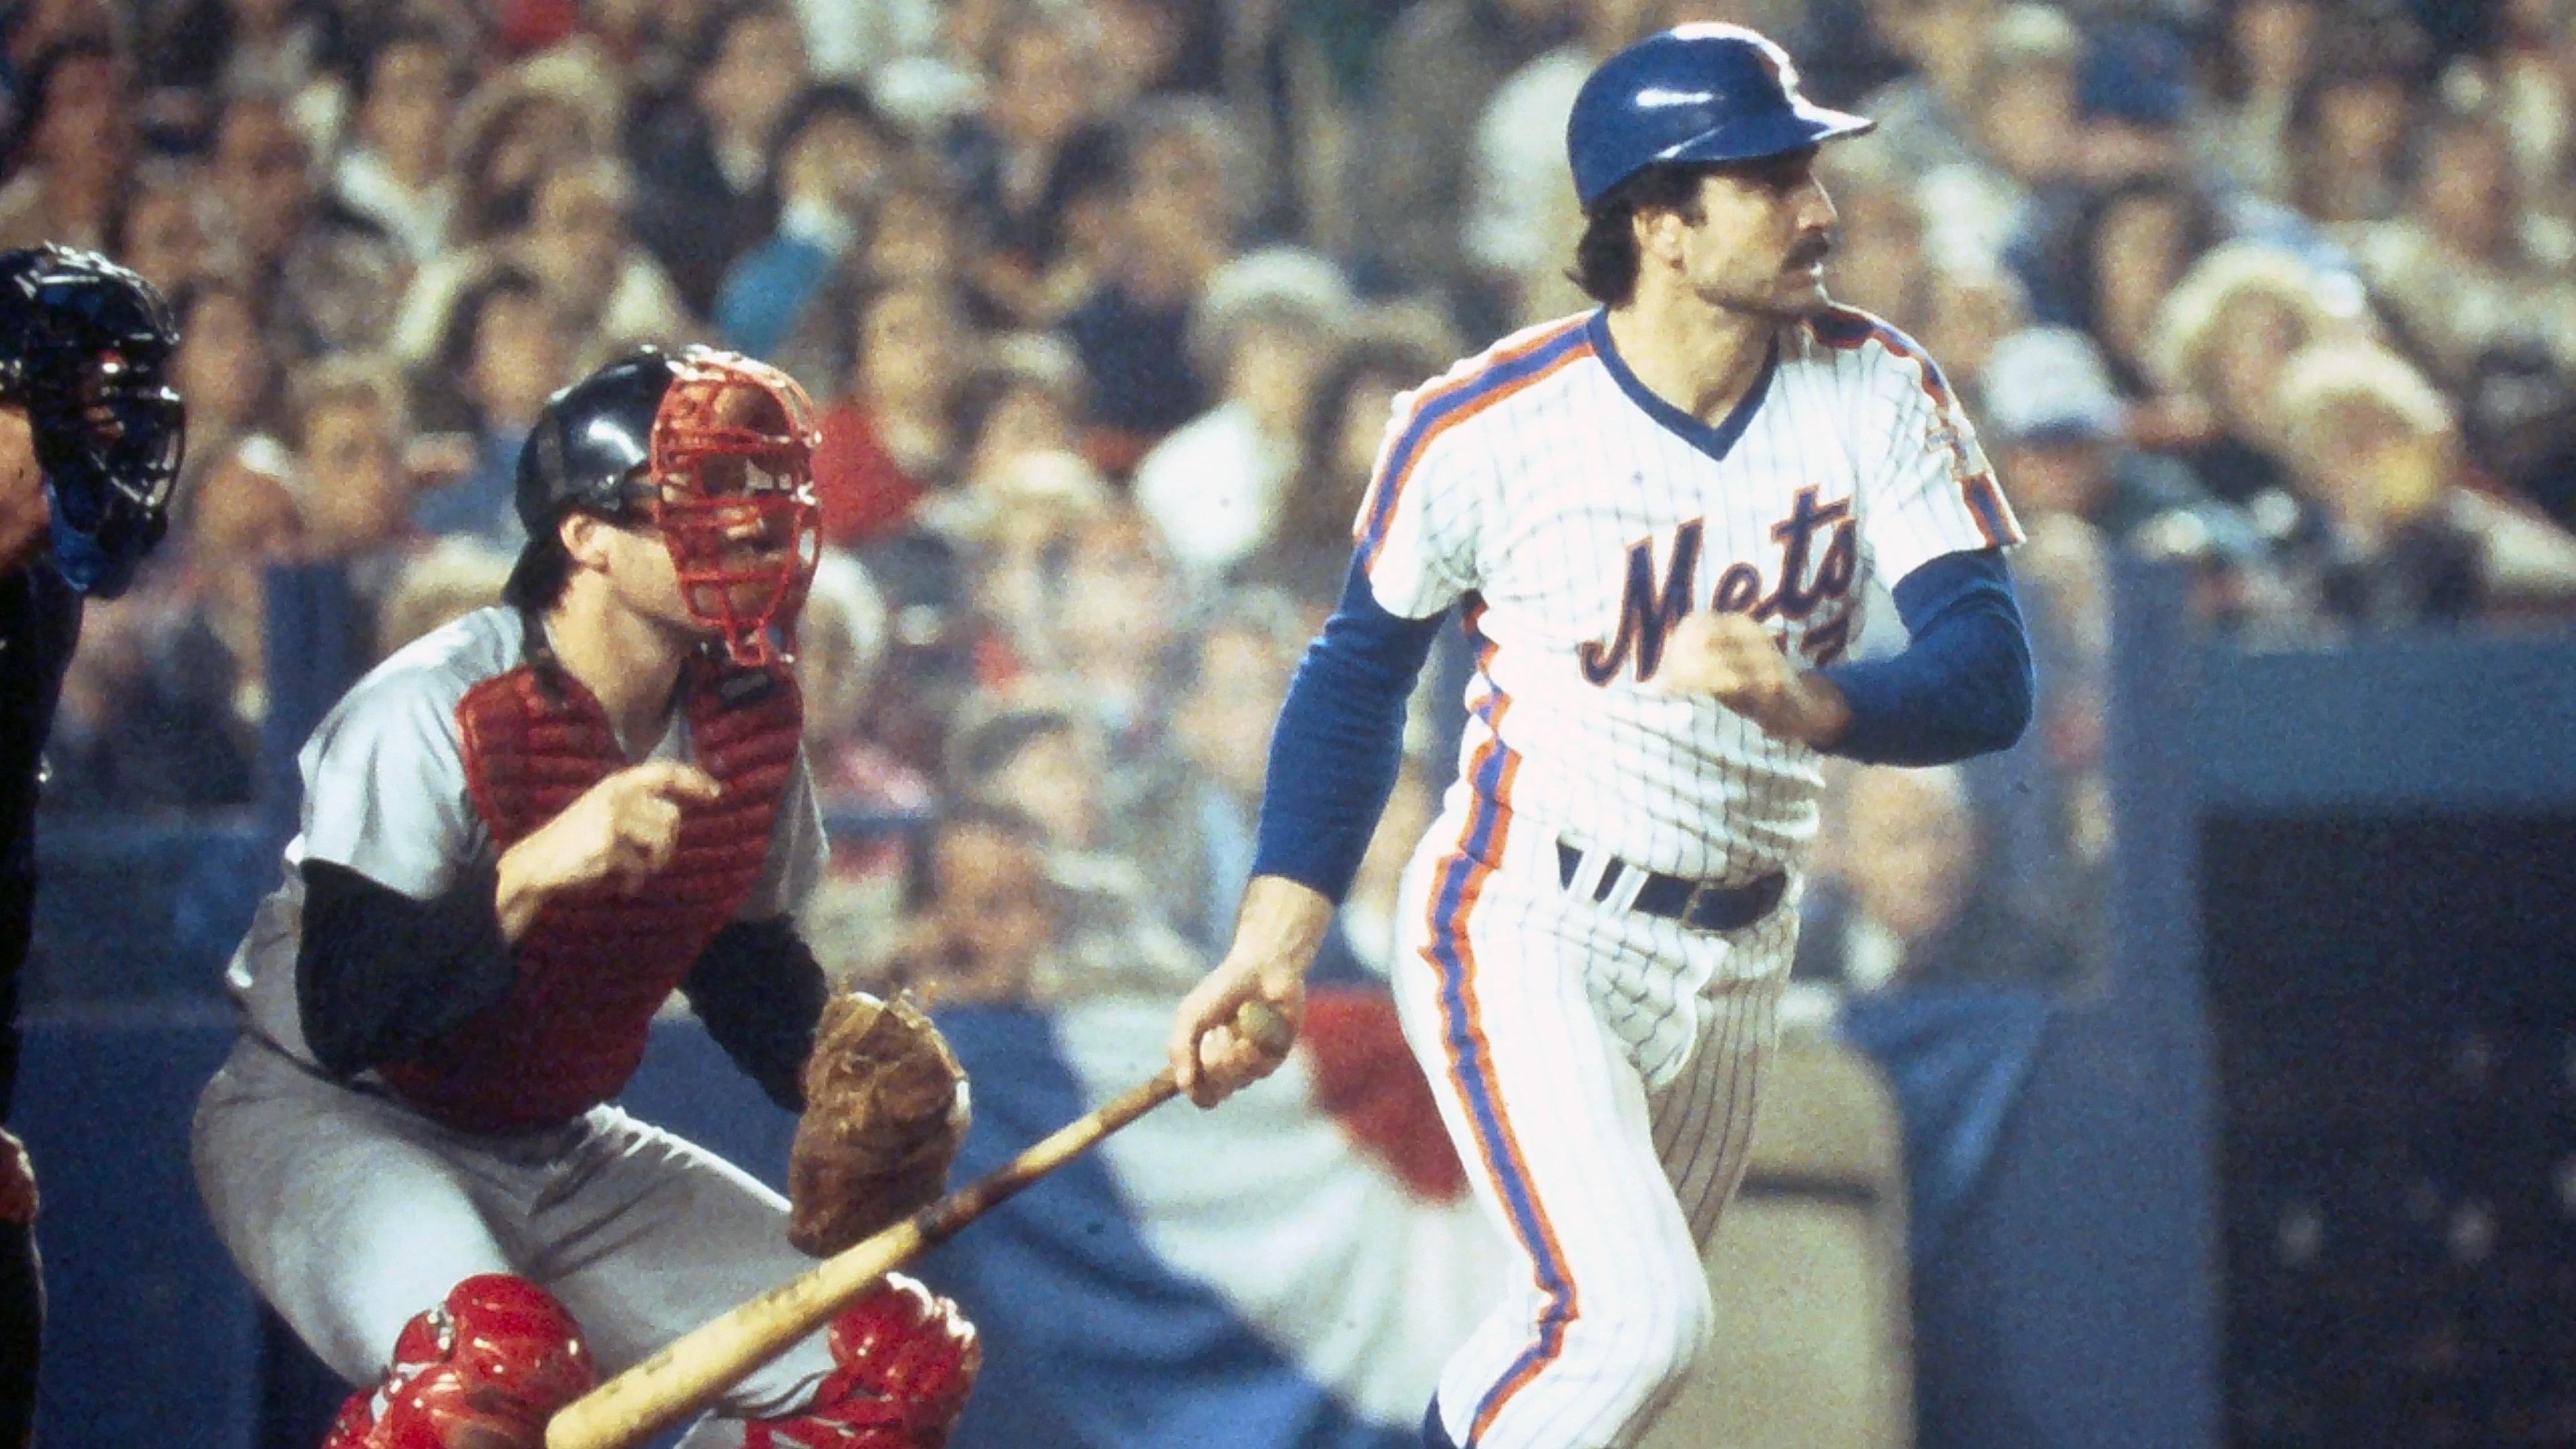 Keith Hernandez hits an rbi single in the 6th inning scoring Mookie Wilson and Lee Mazzilli cutting the Red Sox lead to 3-2 in Game 7 of the World Series at Shea Stadium Oct. 27, 1986. Mets Vs Red Sox 1986 World Series / Frank Becerra Jr/USA TODAY / USA TODAY NETWORK